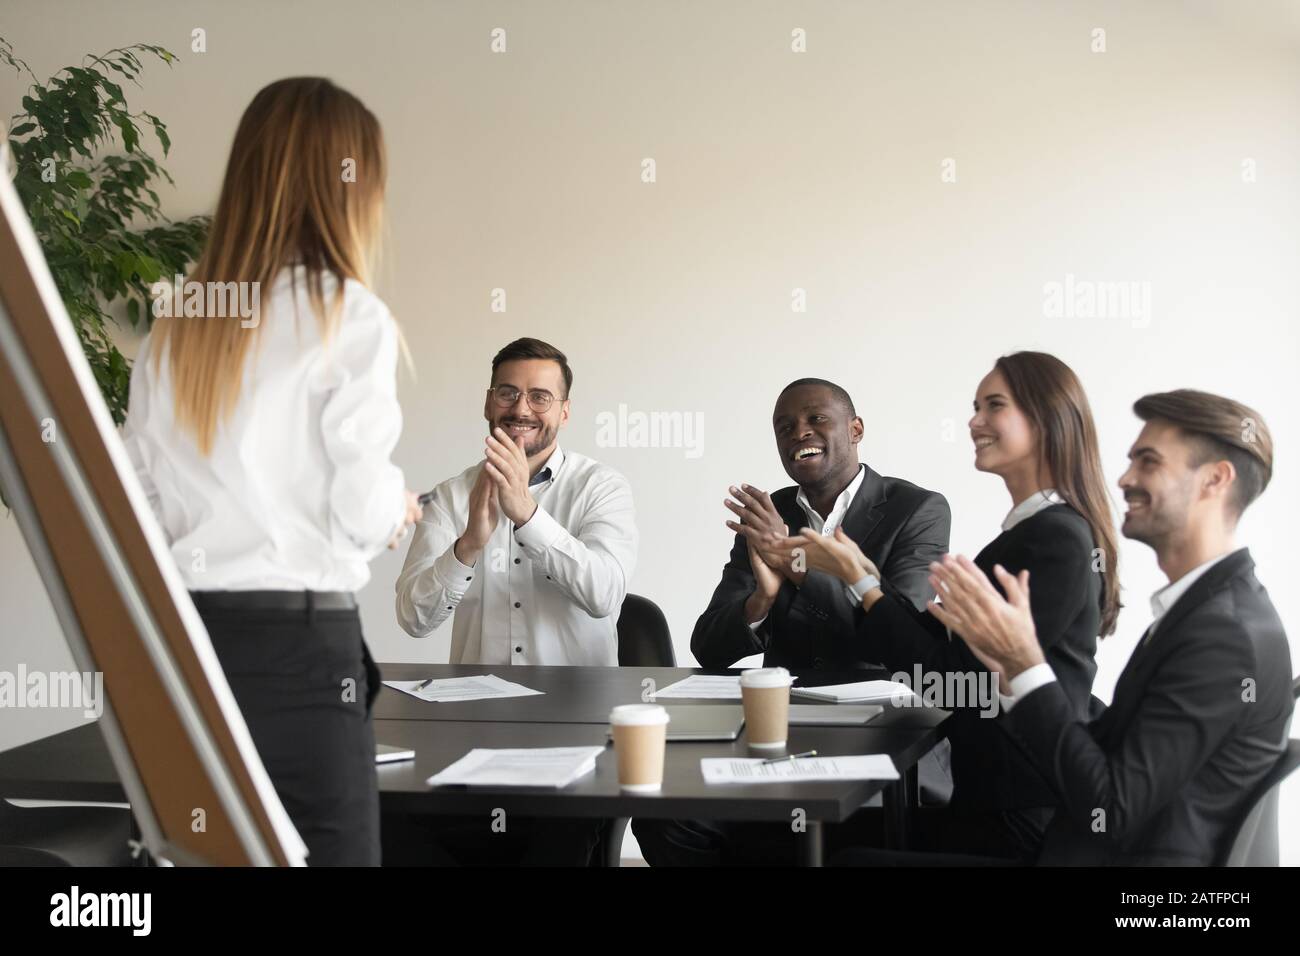 Employees clap hands showing respect and appreciation to business coach Stock Photo